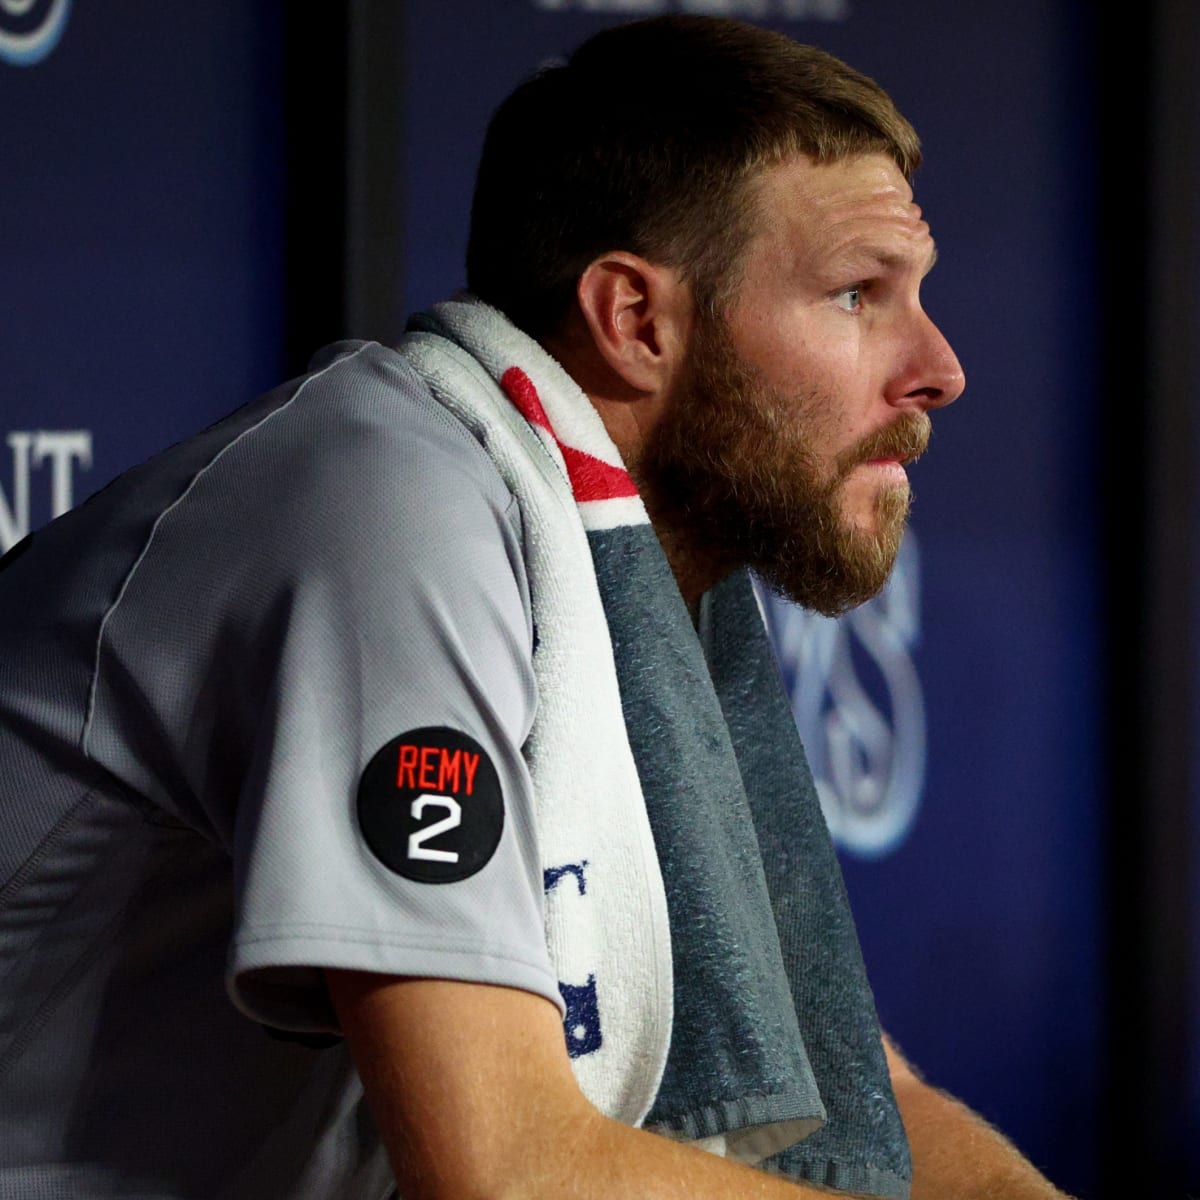 Red Sox starting pitcher Chris Sale injured by 100mph comebacker